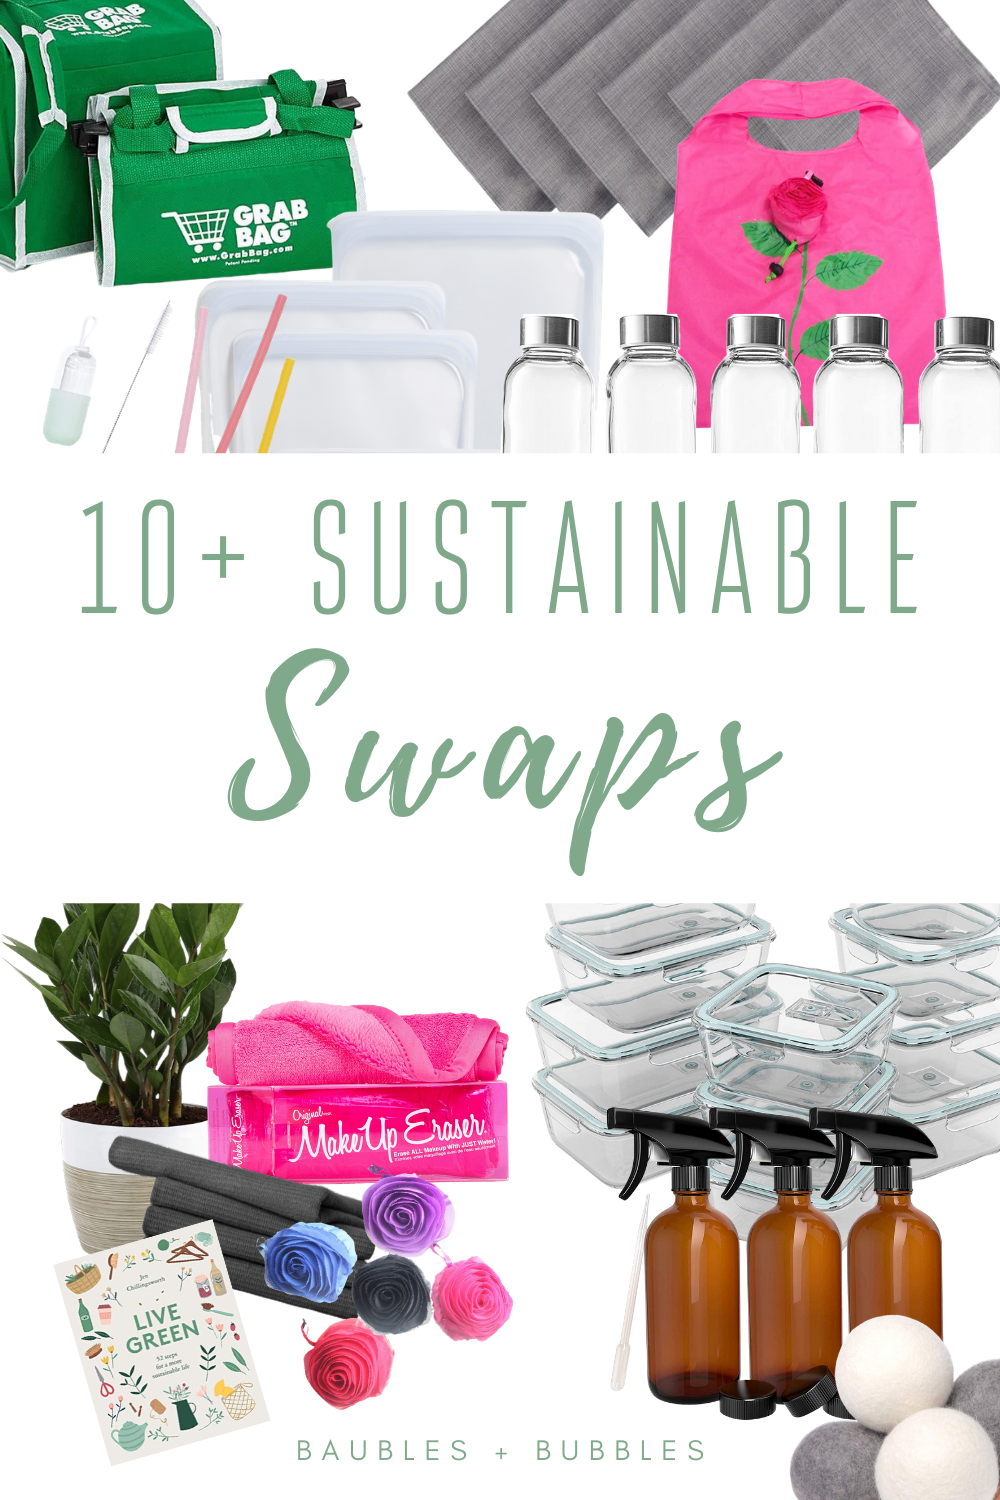 10+ Easy Sustainable Swaps | Baubles + Bubbles